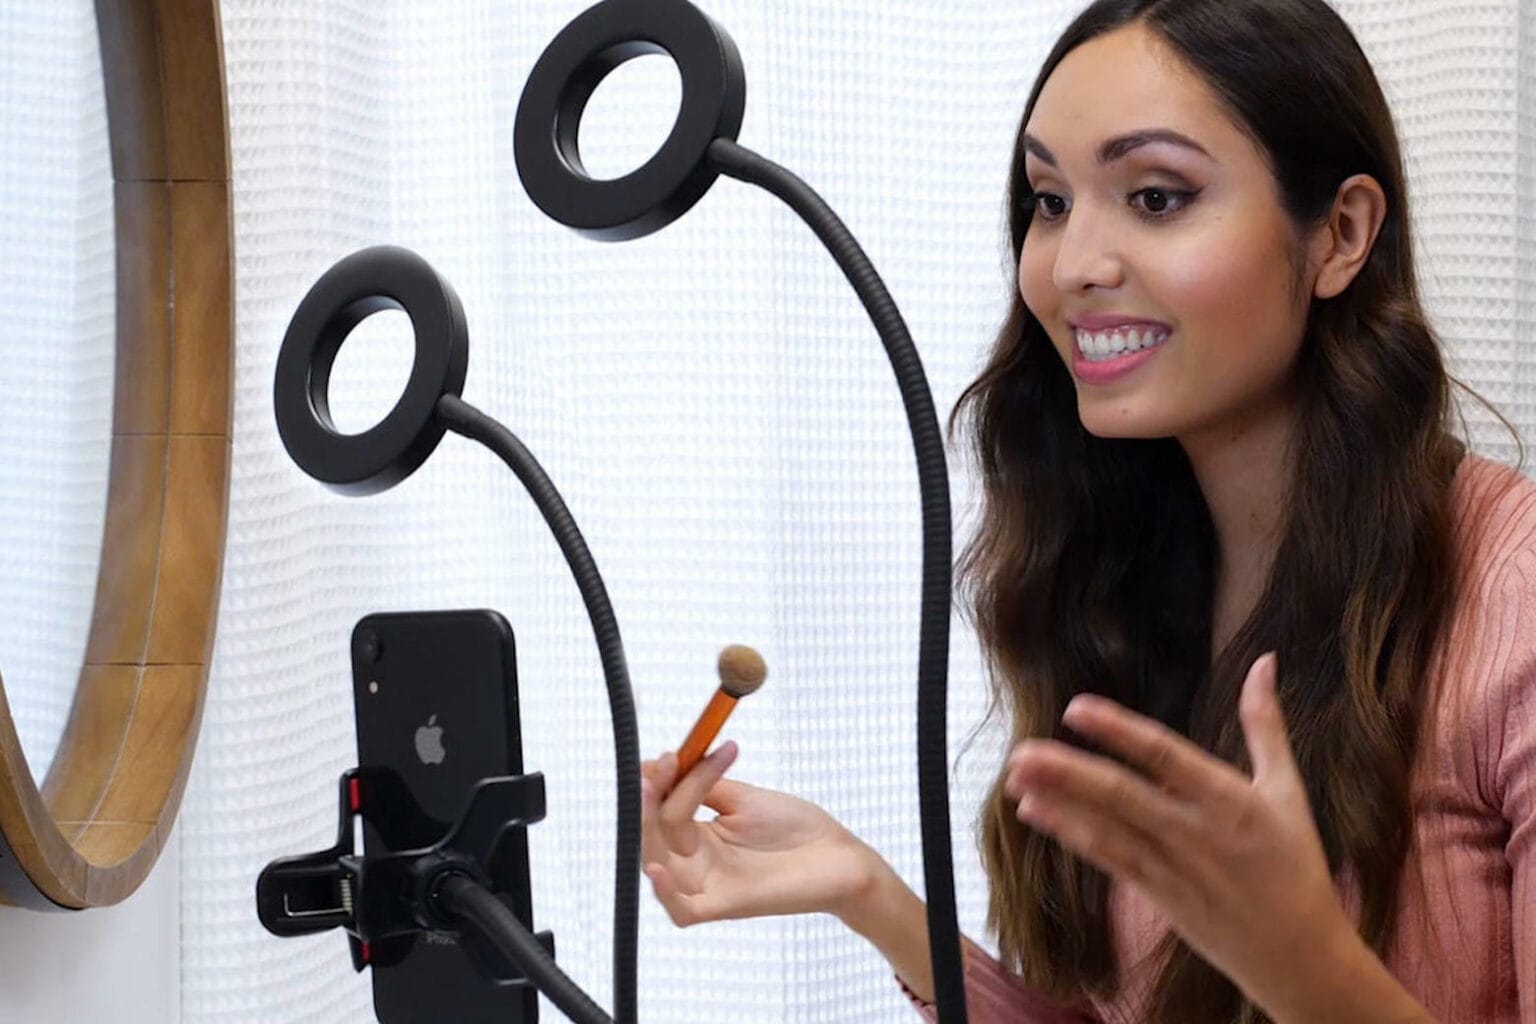 This double ring light streaming studio is the perfect gift for budding social media stars, less than $20 today.